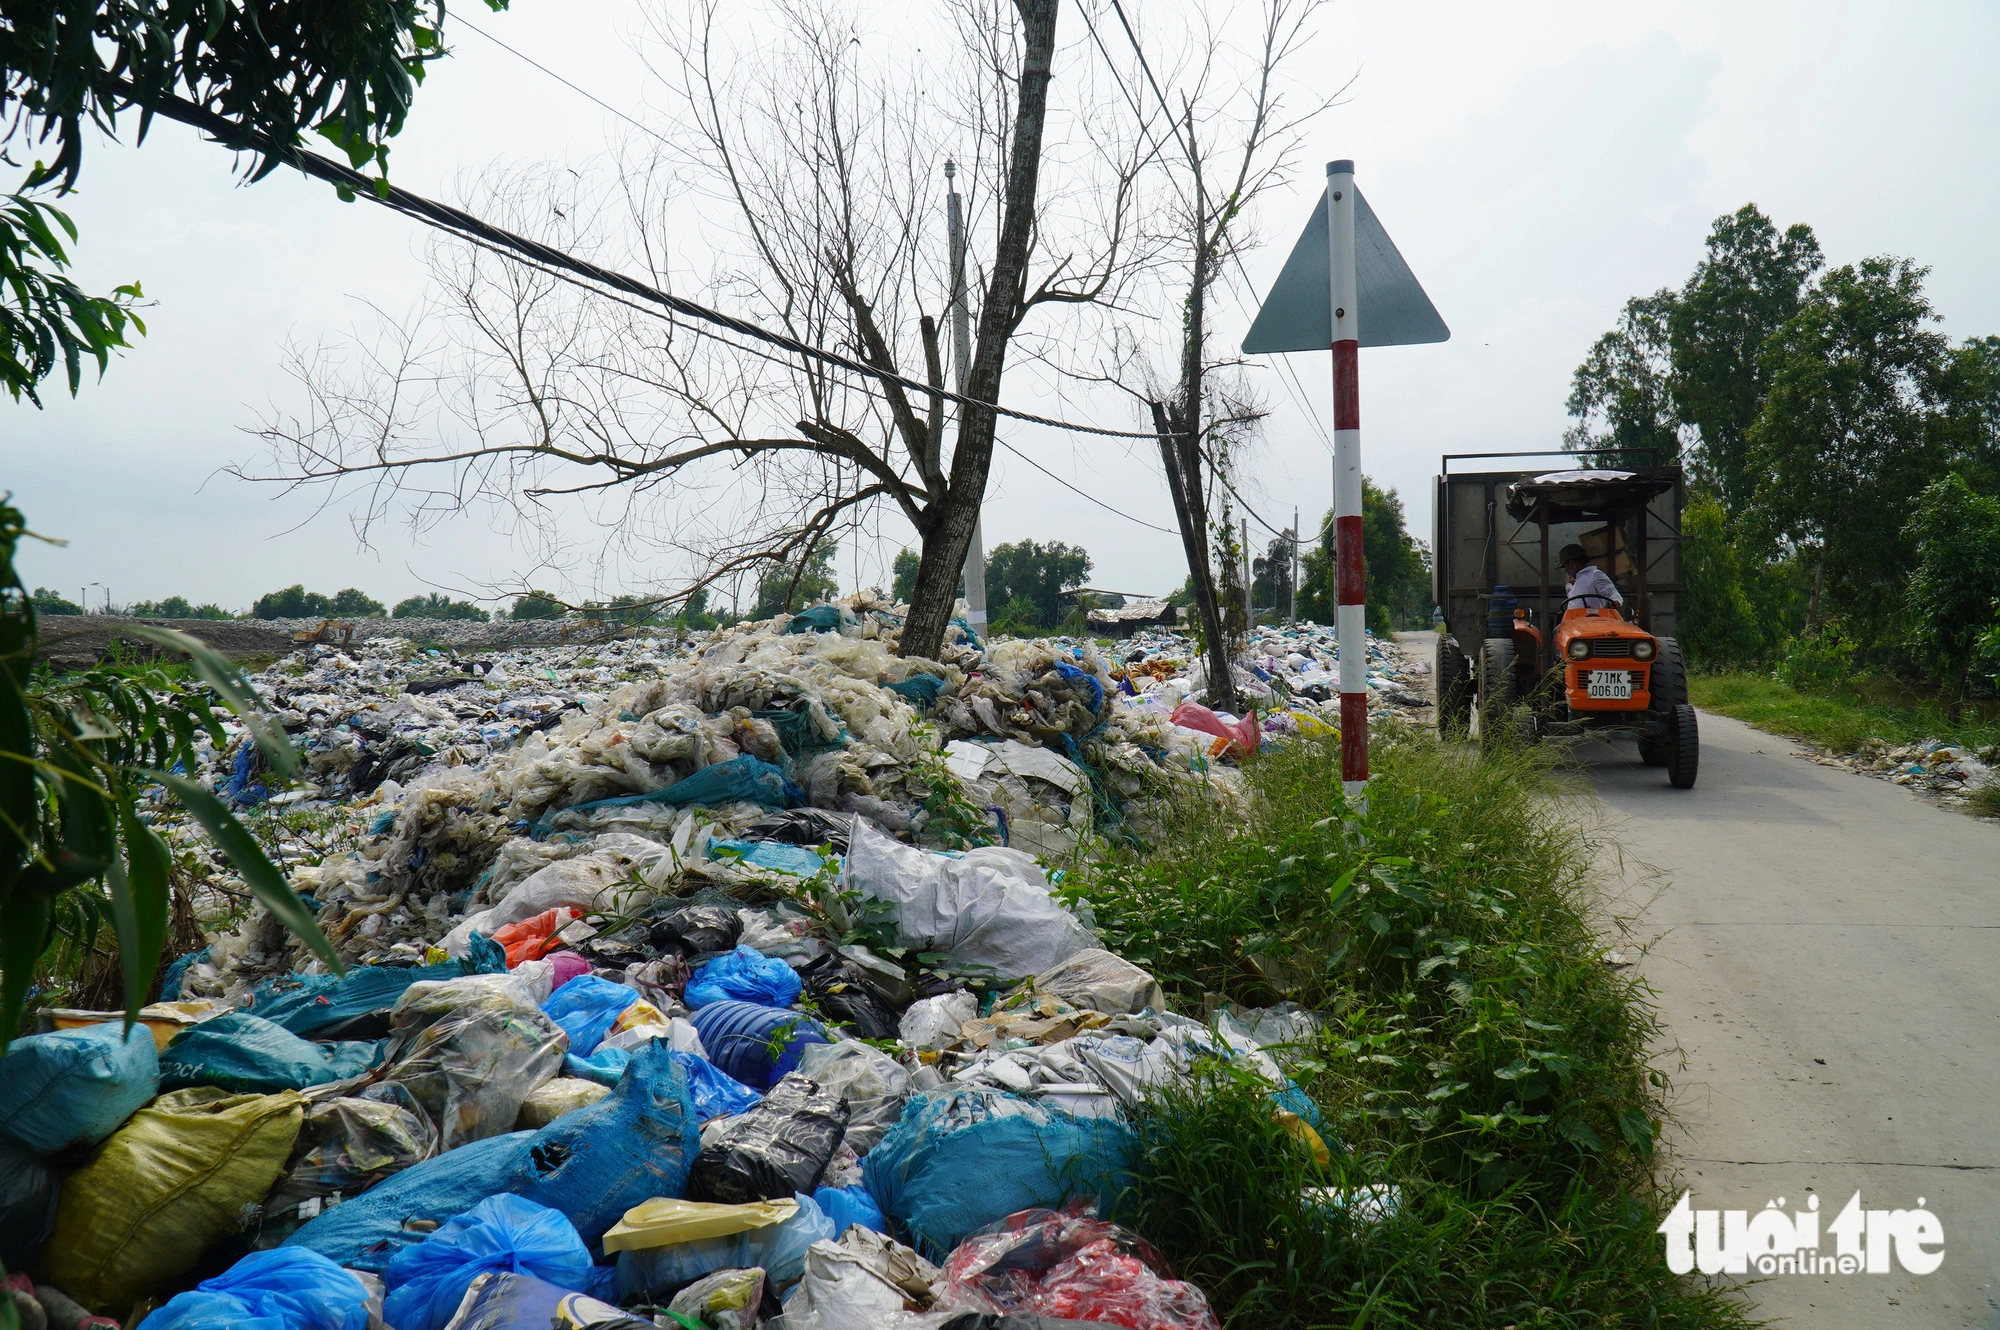 Garbage at the An Hiep landfill spreads to a nearby road. The landfill management unit has now built a fence surrounding the site. Photo: Mau Truong / Tuoi Tre